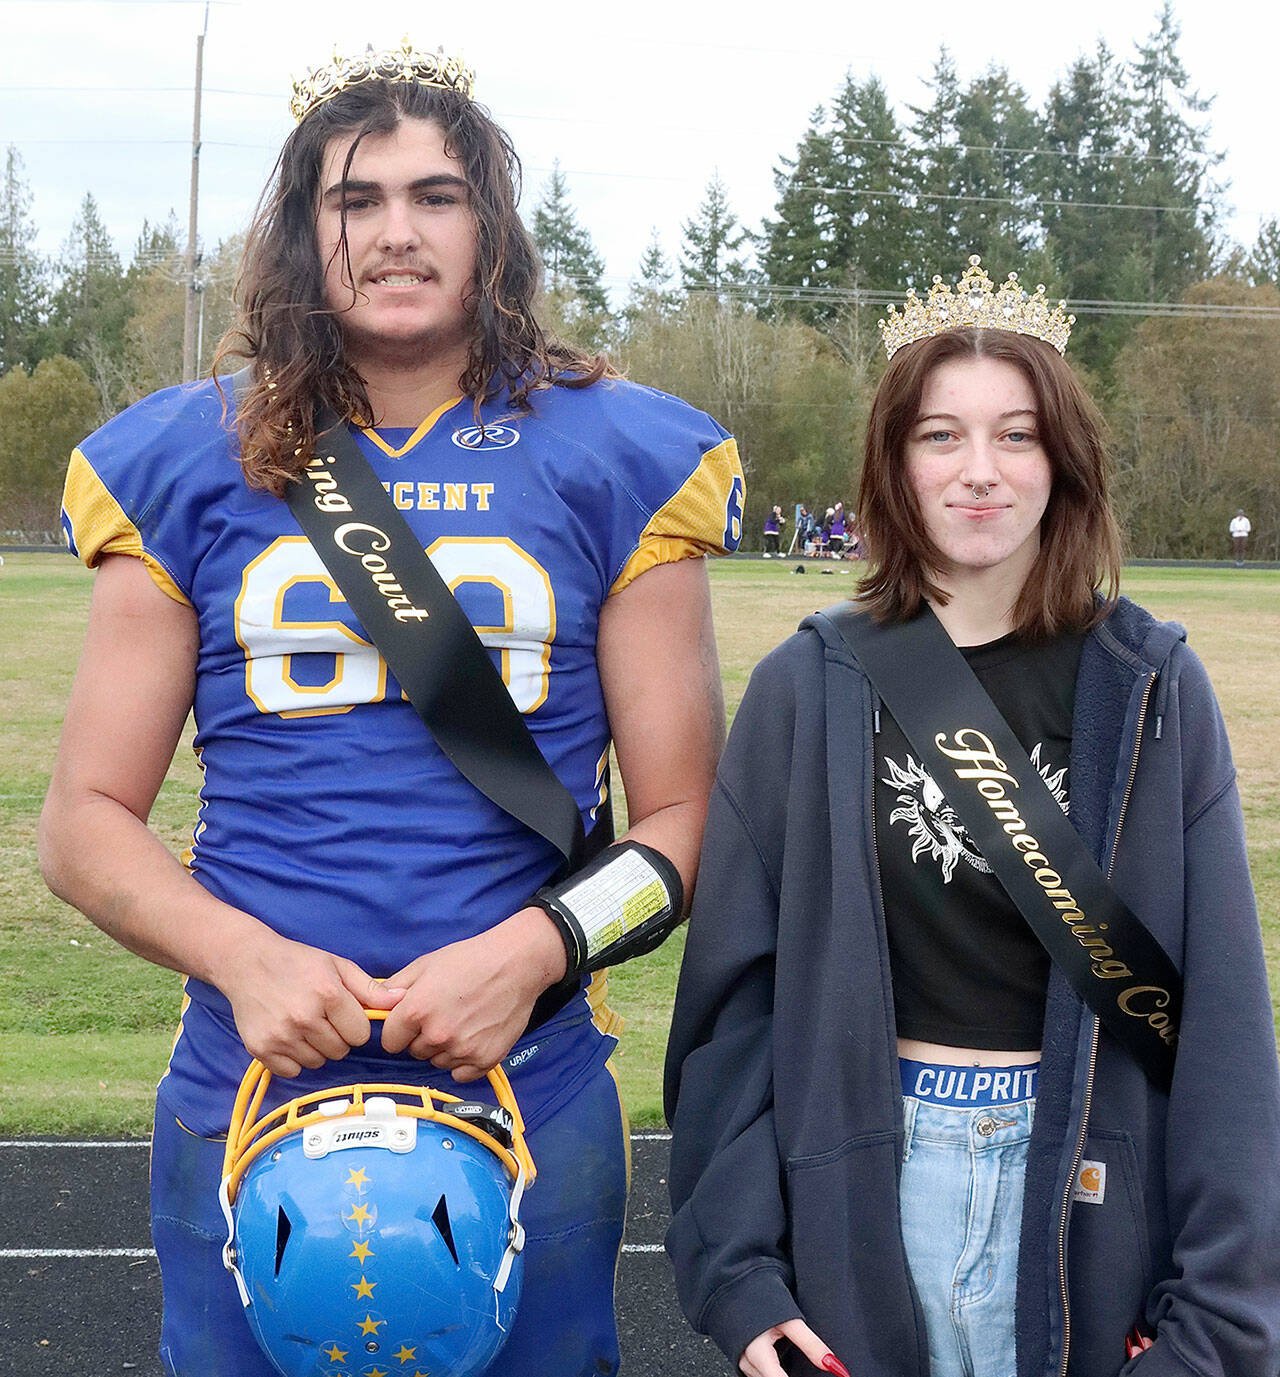 The Crescent High School king and queen of Homecoming 2022 are Conner Ferro-May and Bay Peppard. They were crowned at halftime the Loggers’ home football game against Quilcene on Saturday at Crescent School. (Dave Logan/for Peninsula Daily News)